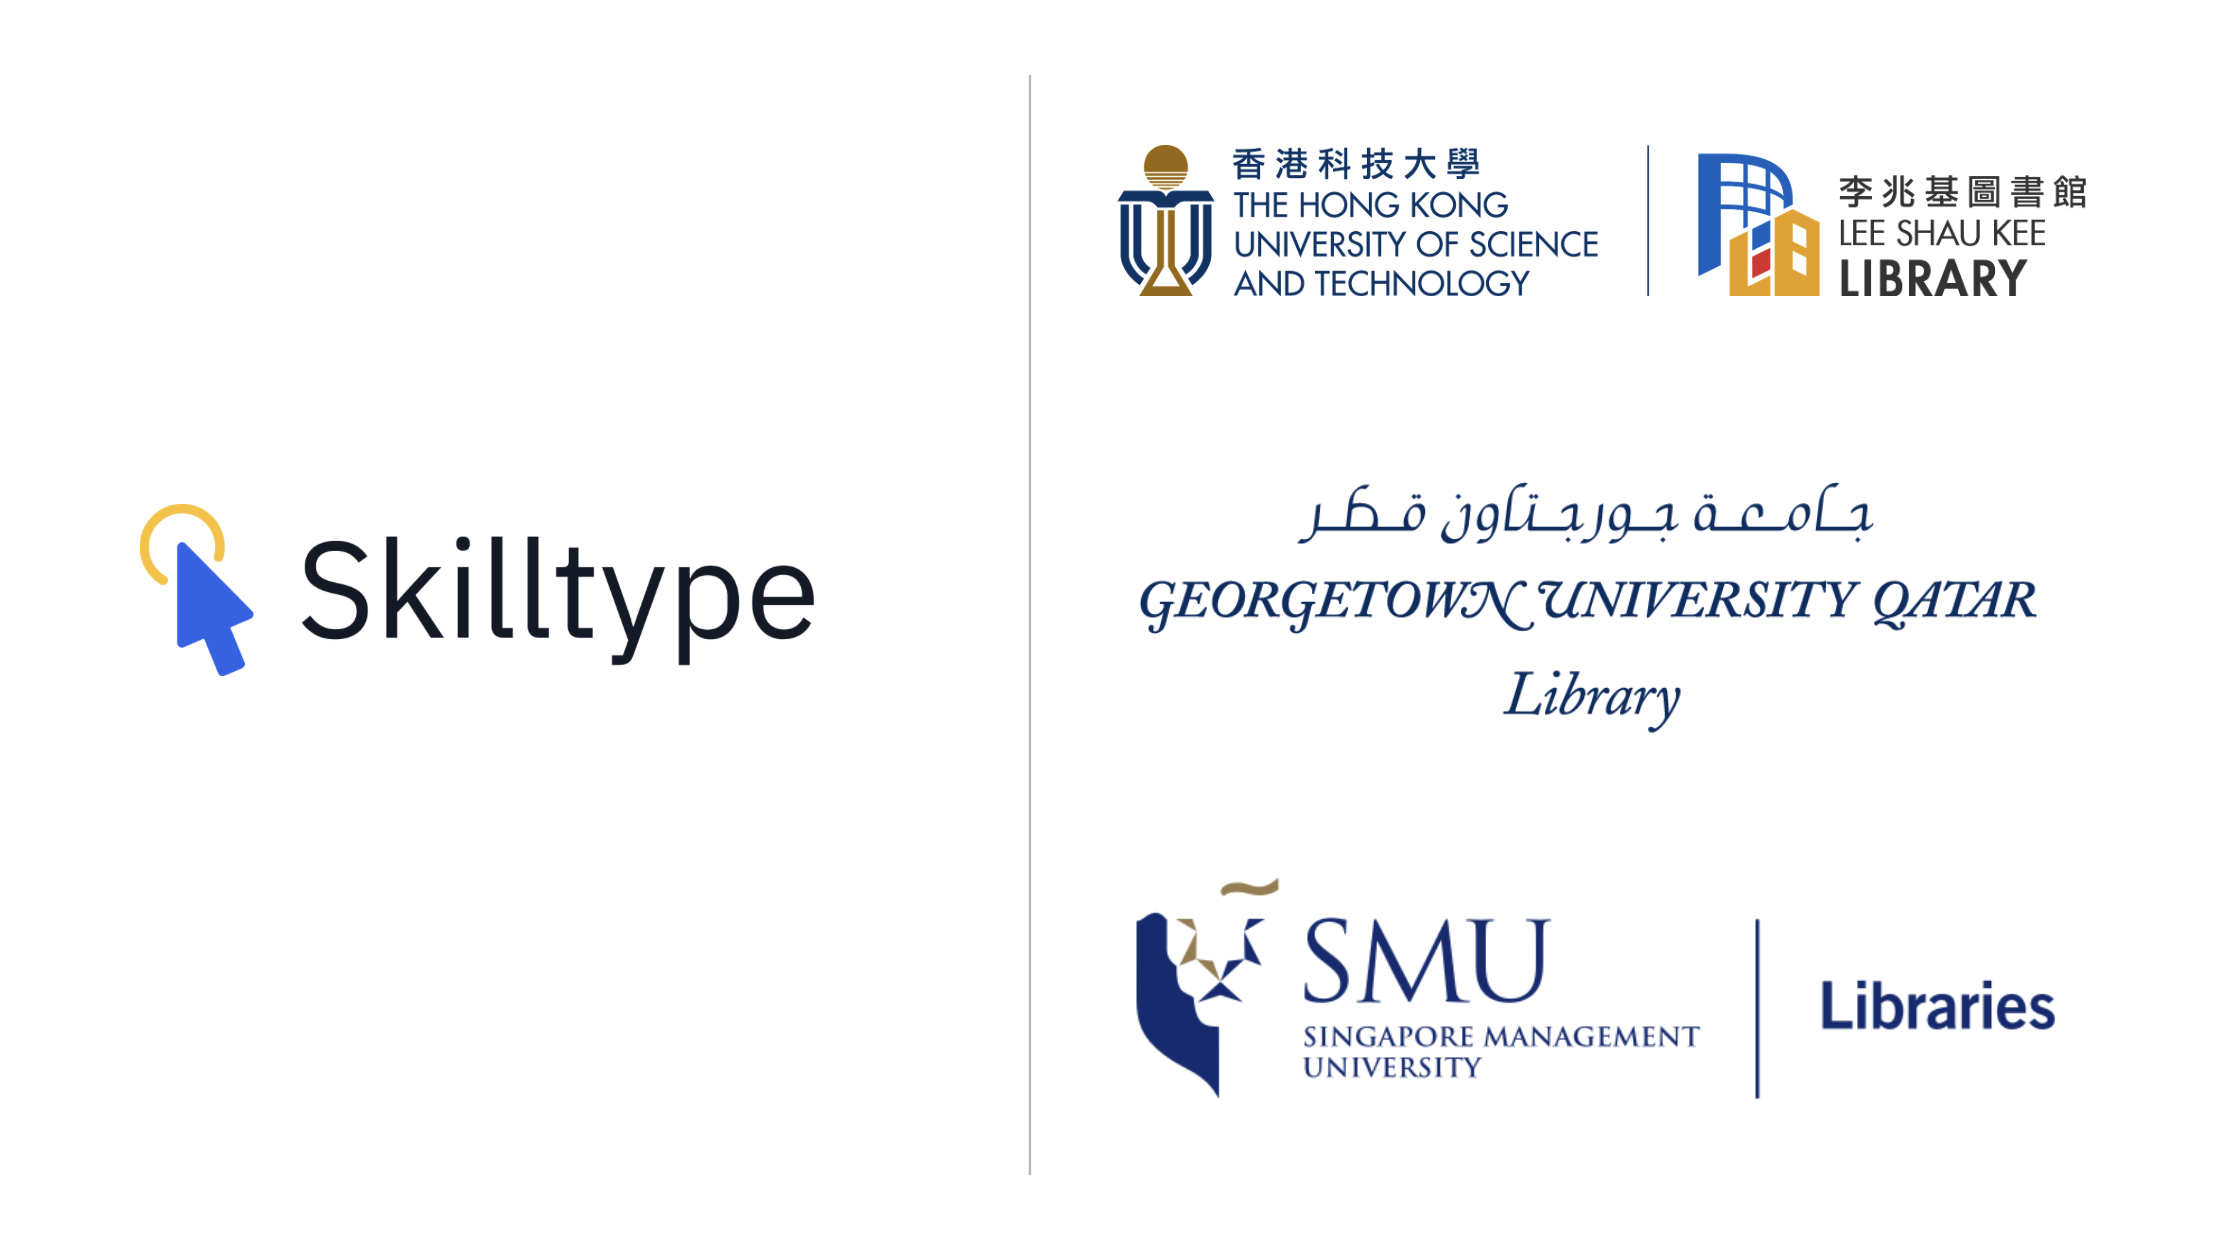 Libraries in Asia and Middle East Select Skilltype for Skill Development